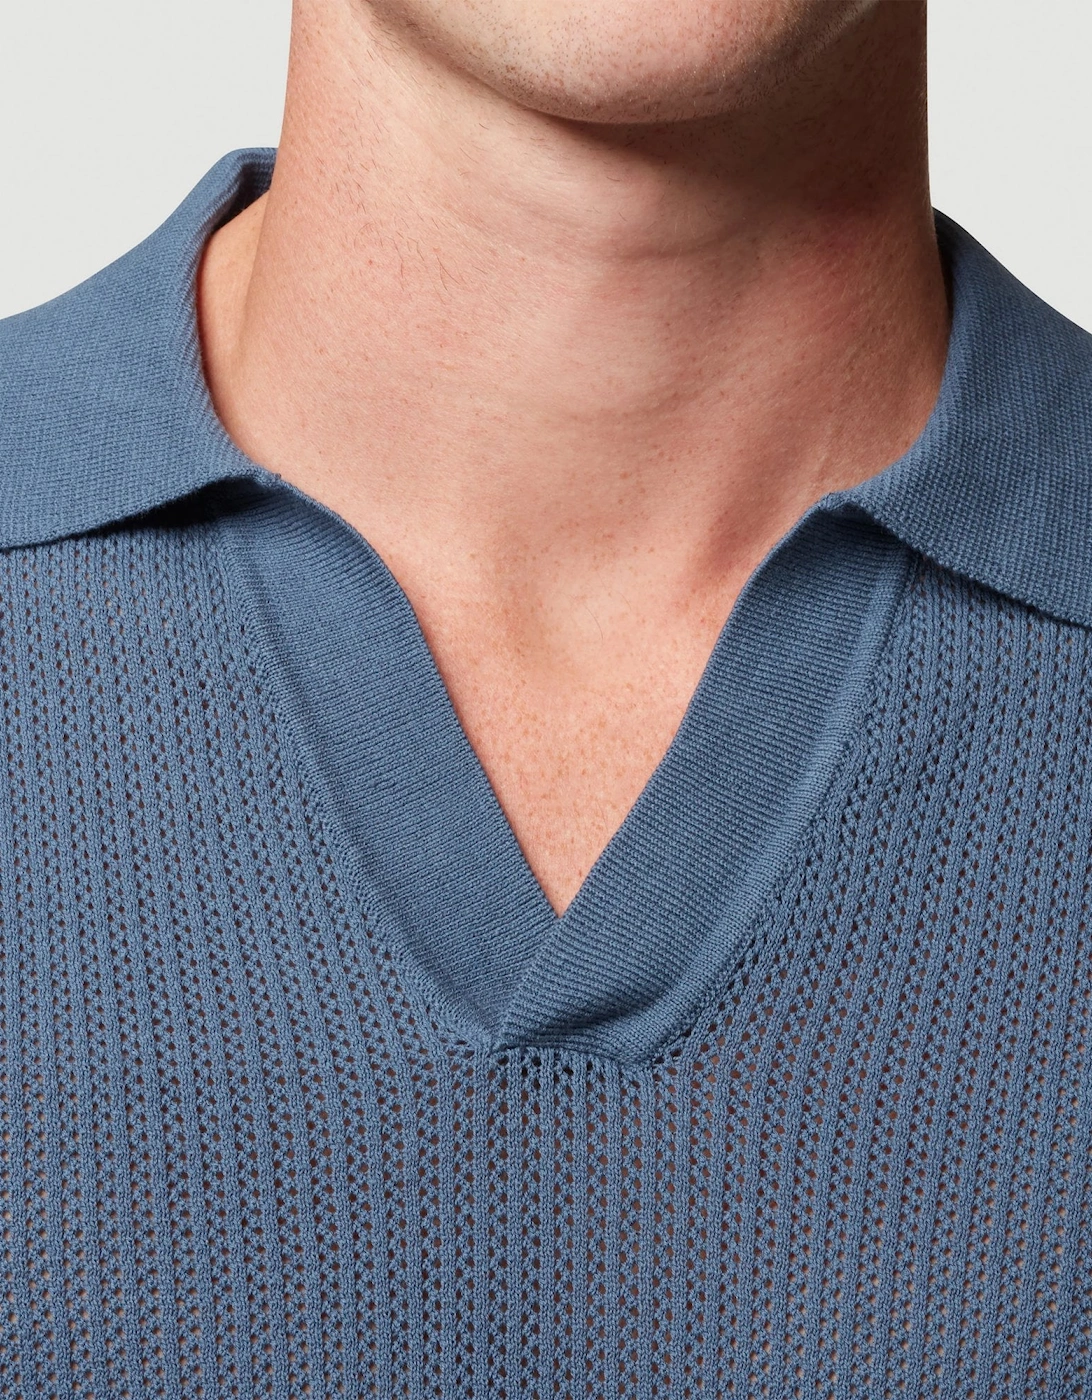 Libera Knitted Open Neck Knitted Washed Navy Polo